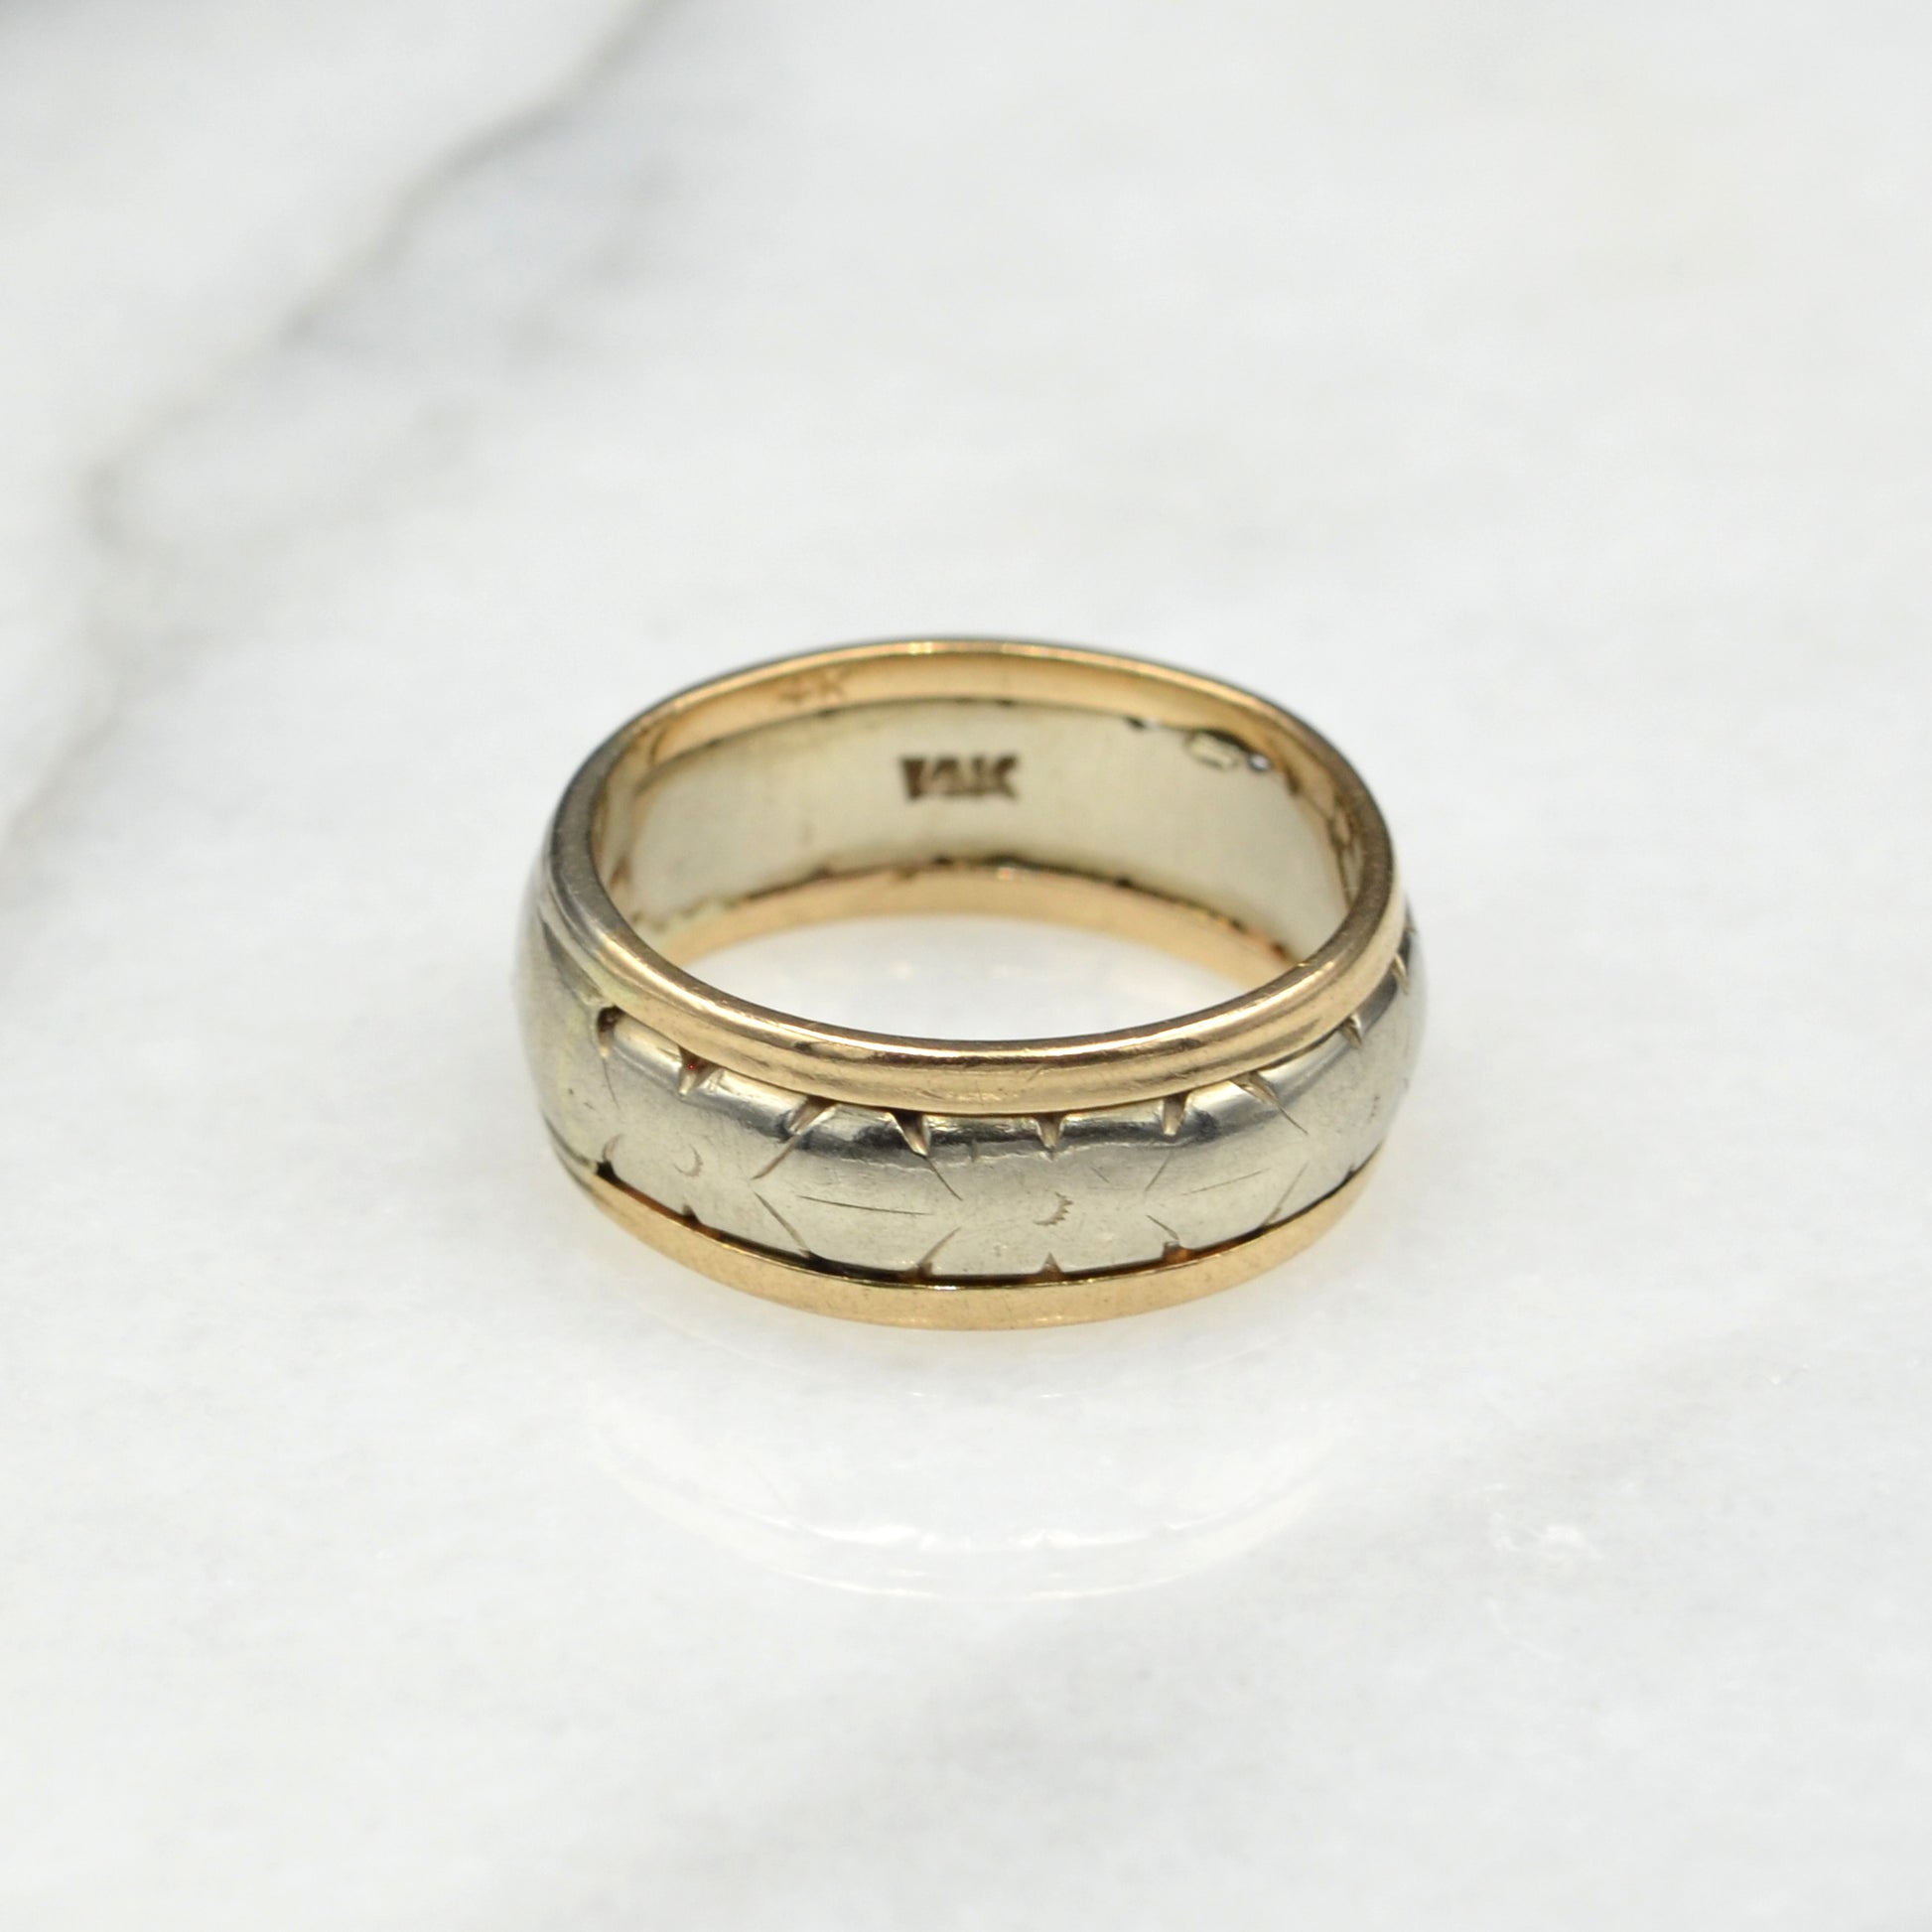 Vintage 14k White and Yellow Gold Wedding Band